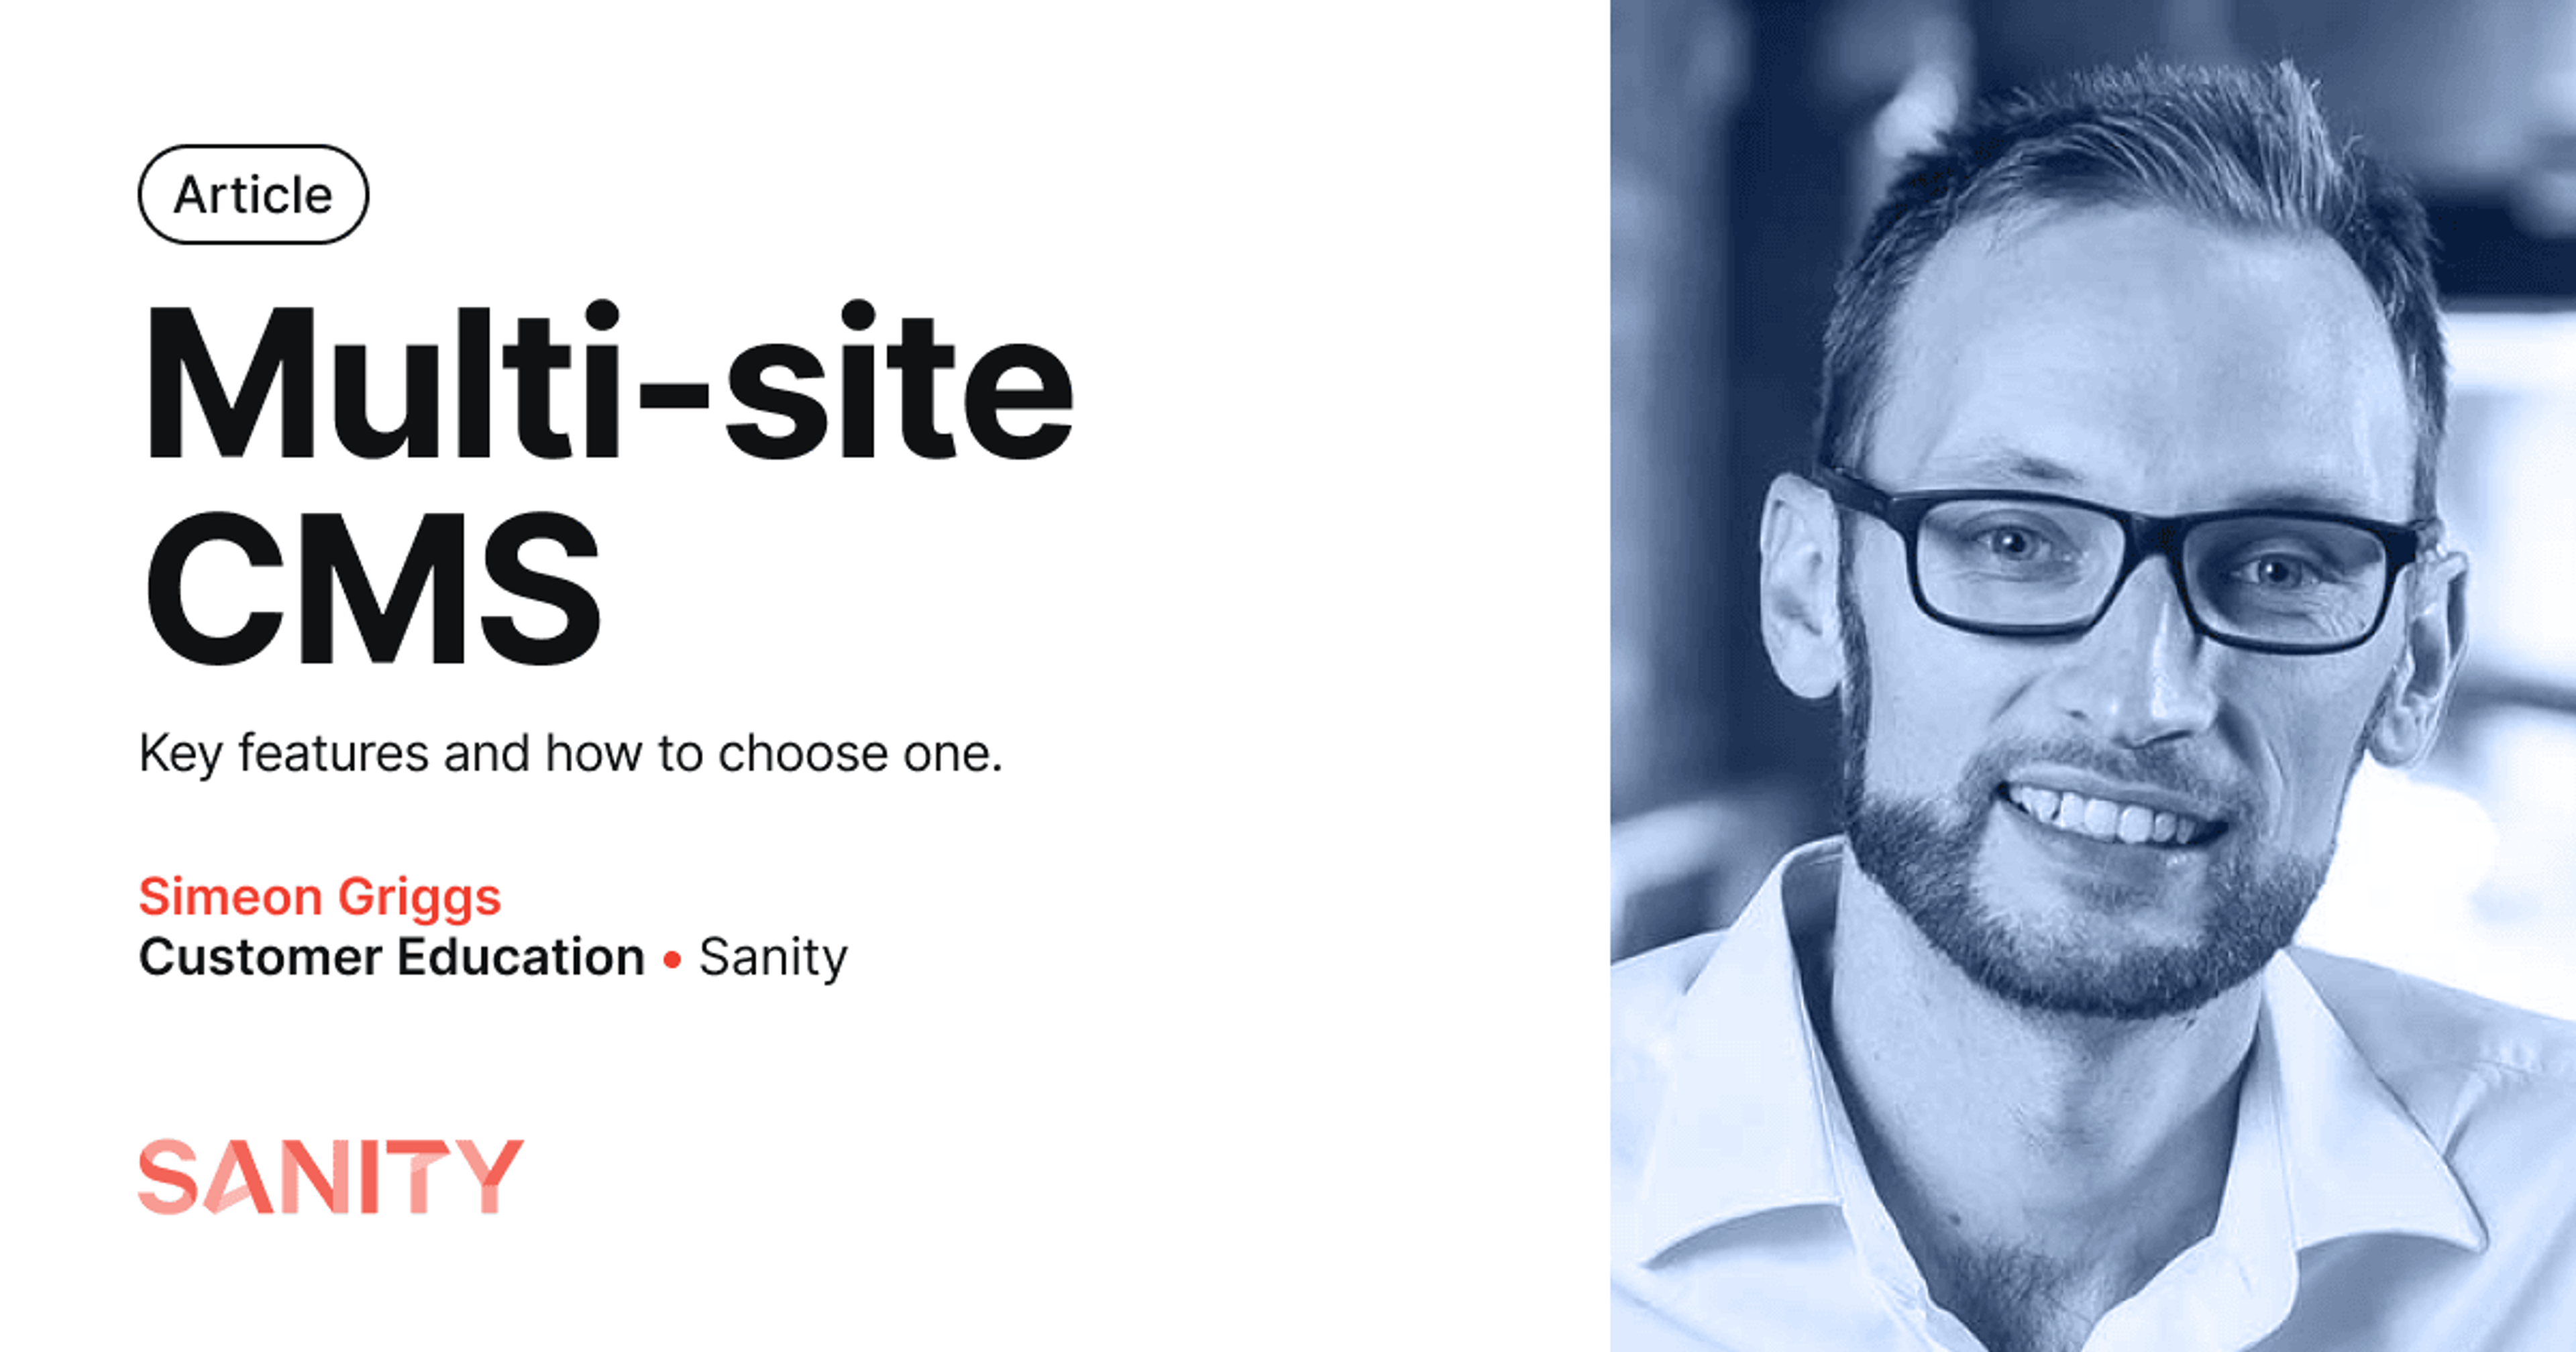 Image with a white background and a headshot of Simeon Griggs. The image reads: Article - Multi-site CMS - Key features and how to choose one.